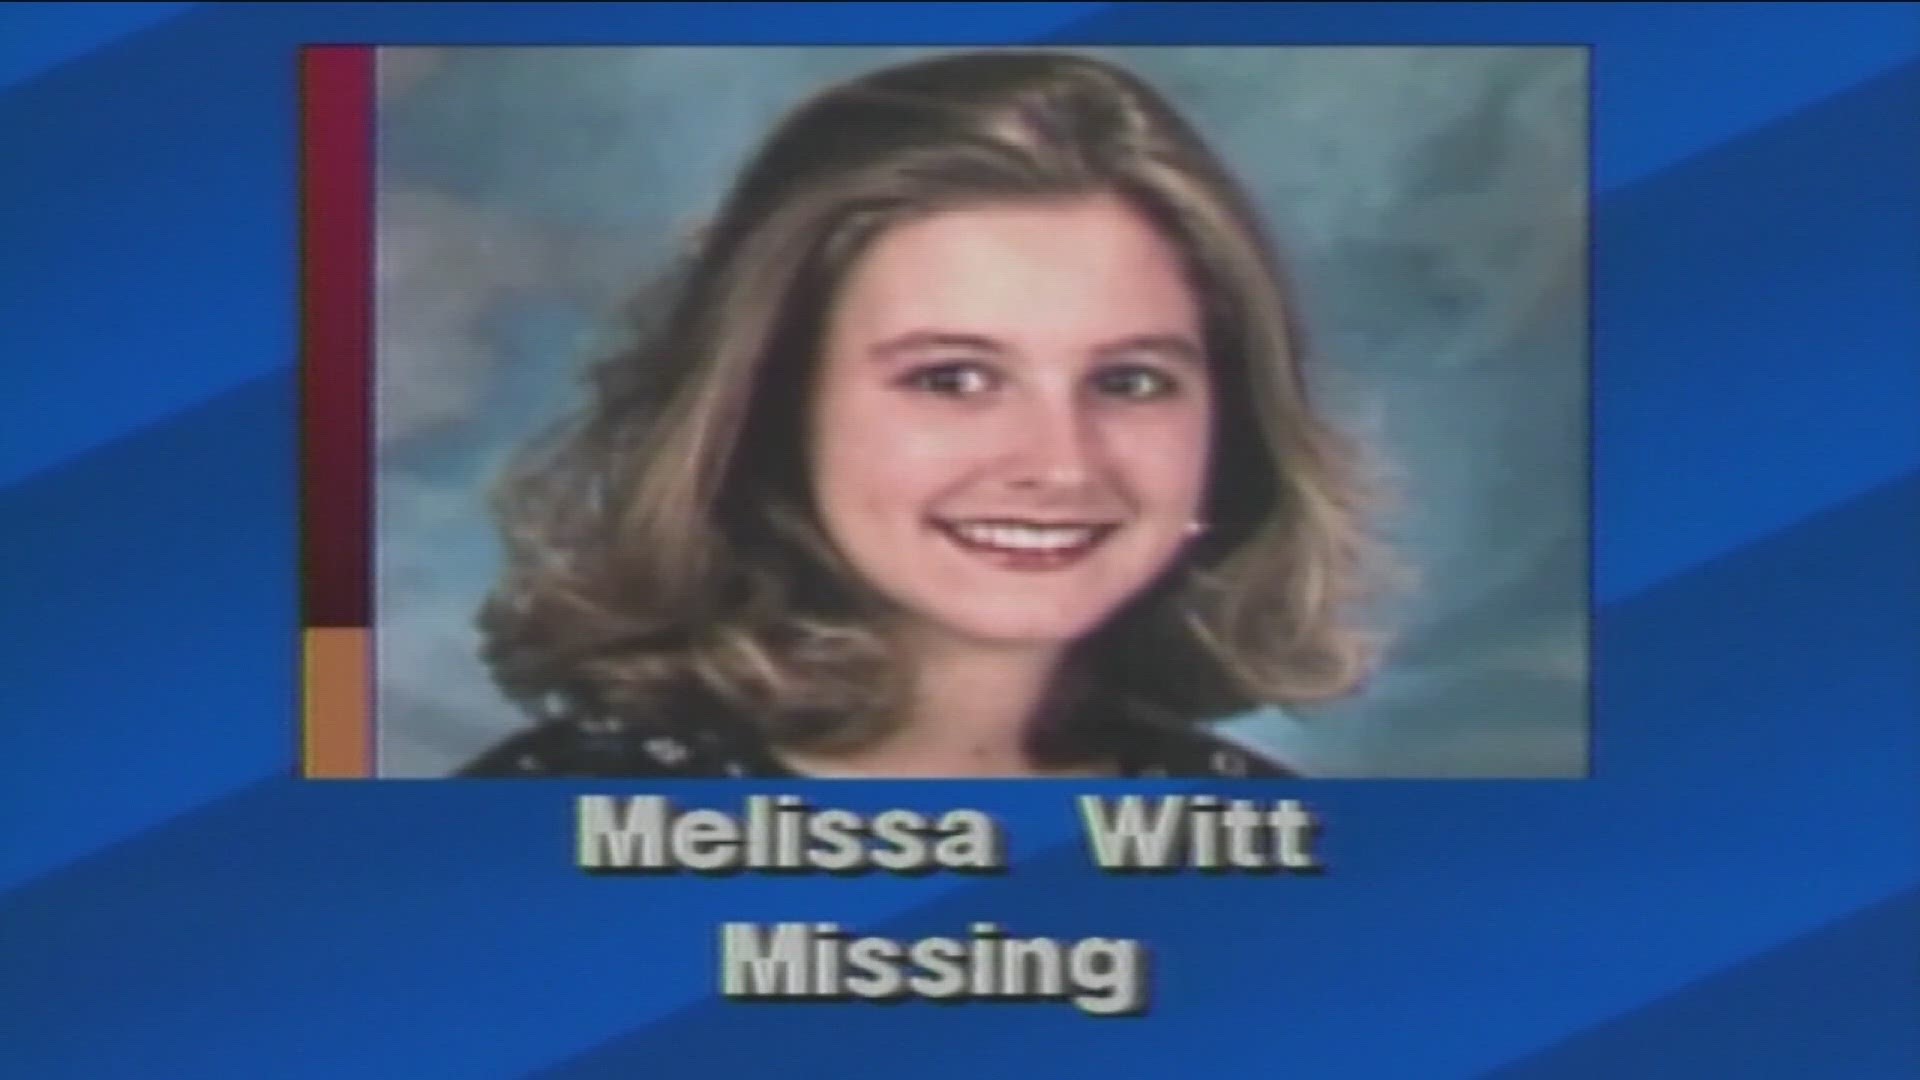 For the past 29 years, Witt's murder case has remained open.